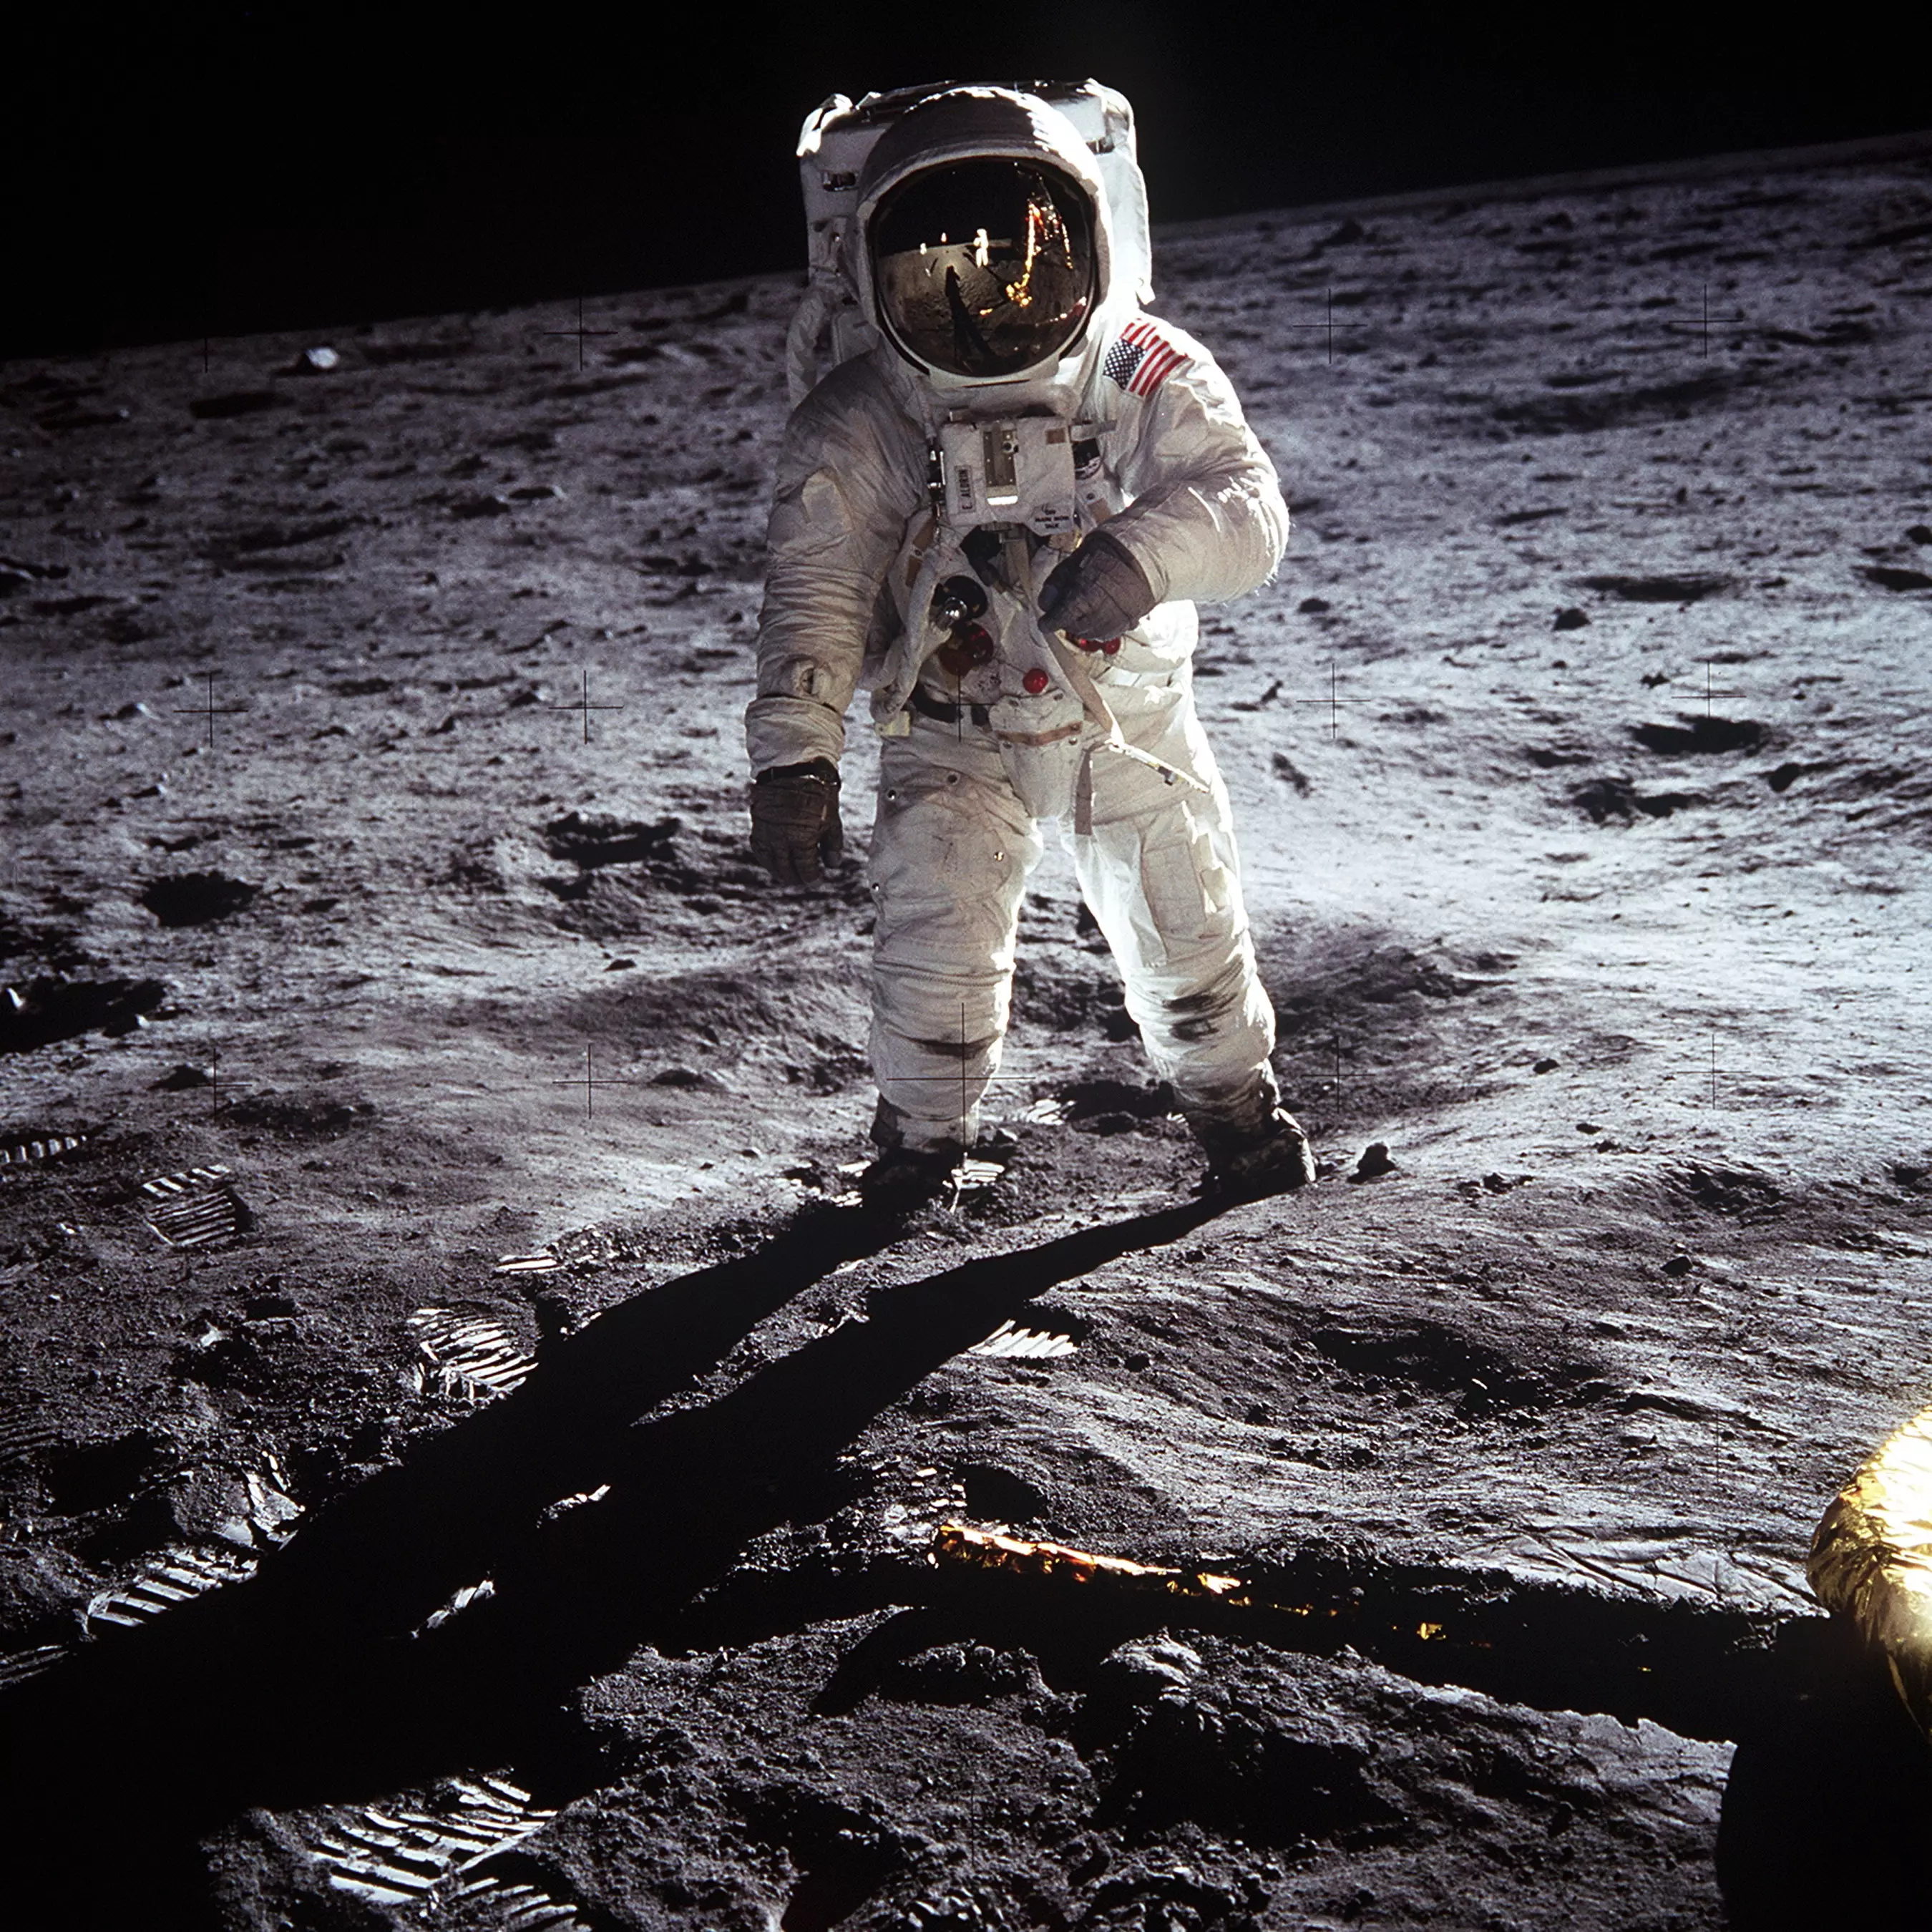 Buzz Aldrin and Neil Armstrong were the first two people to walk on the moon.